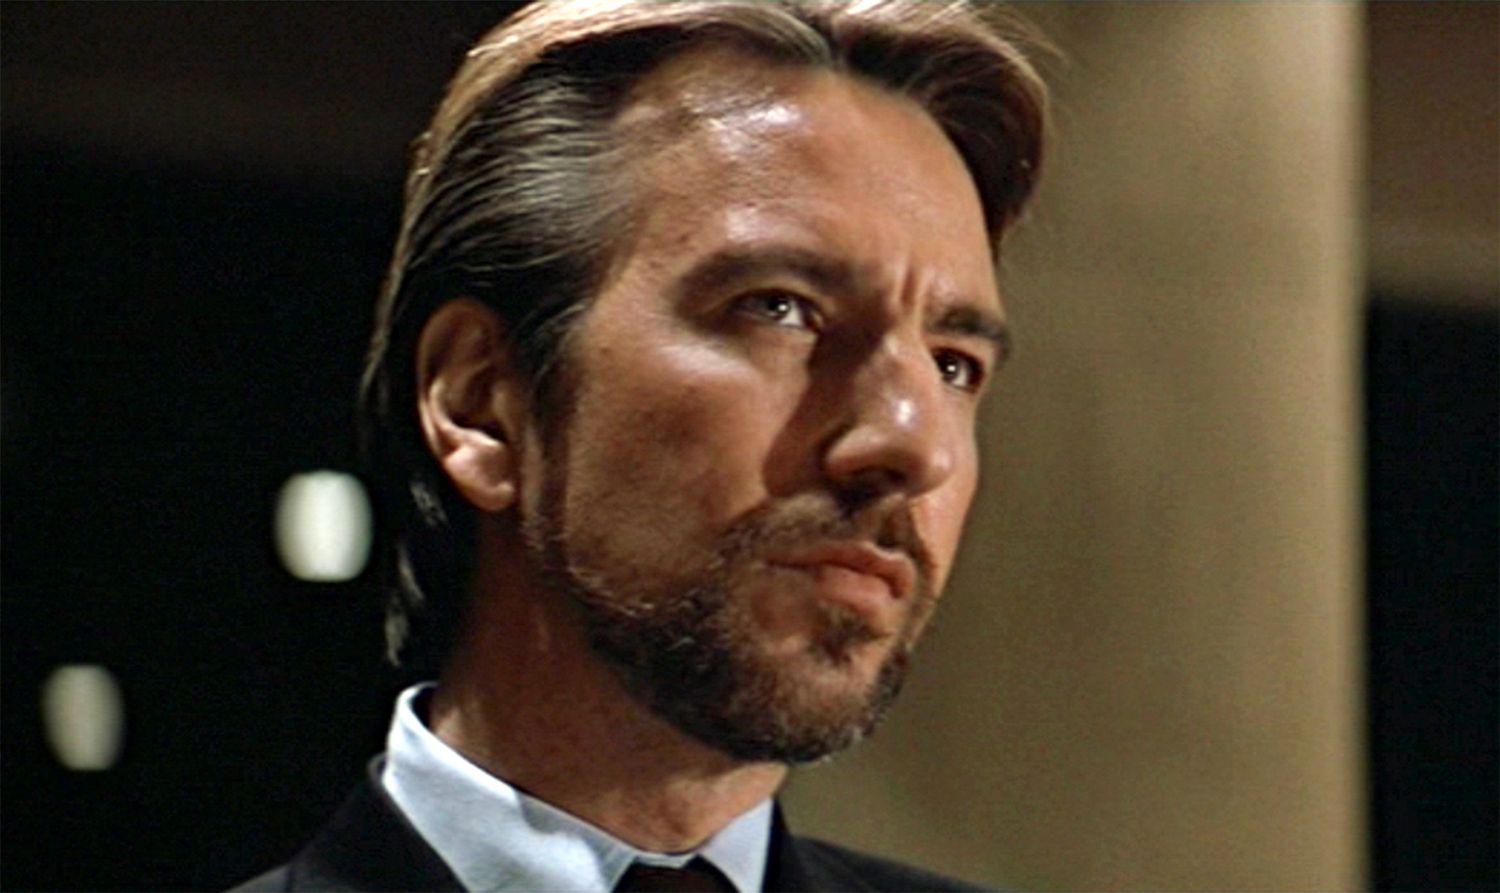 Alan Rickman As Hans Gruber From Die Hard 24X36 Poster With Crew 